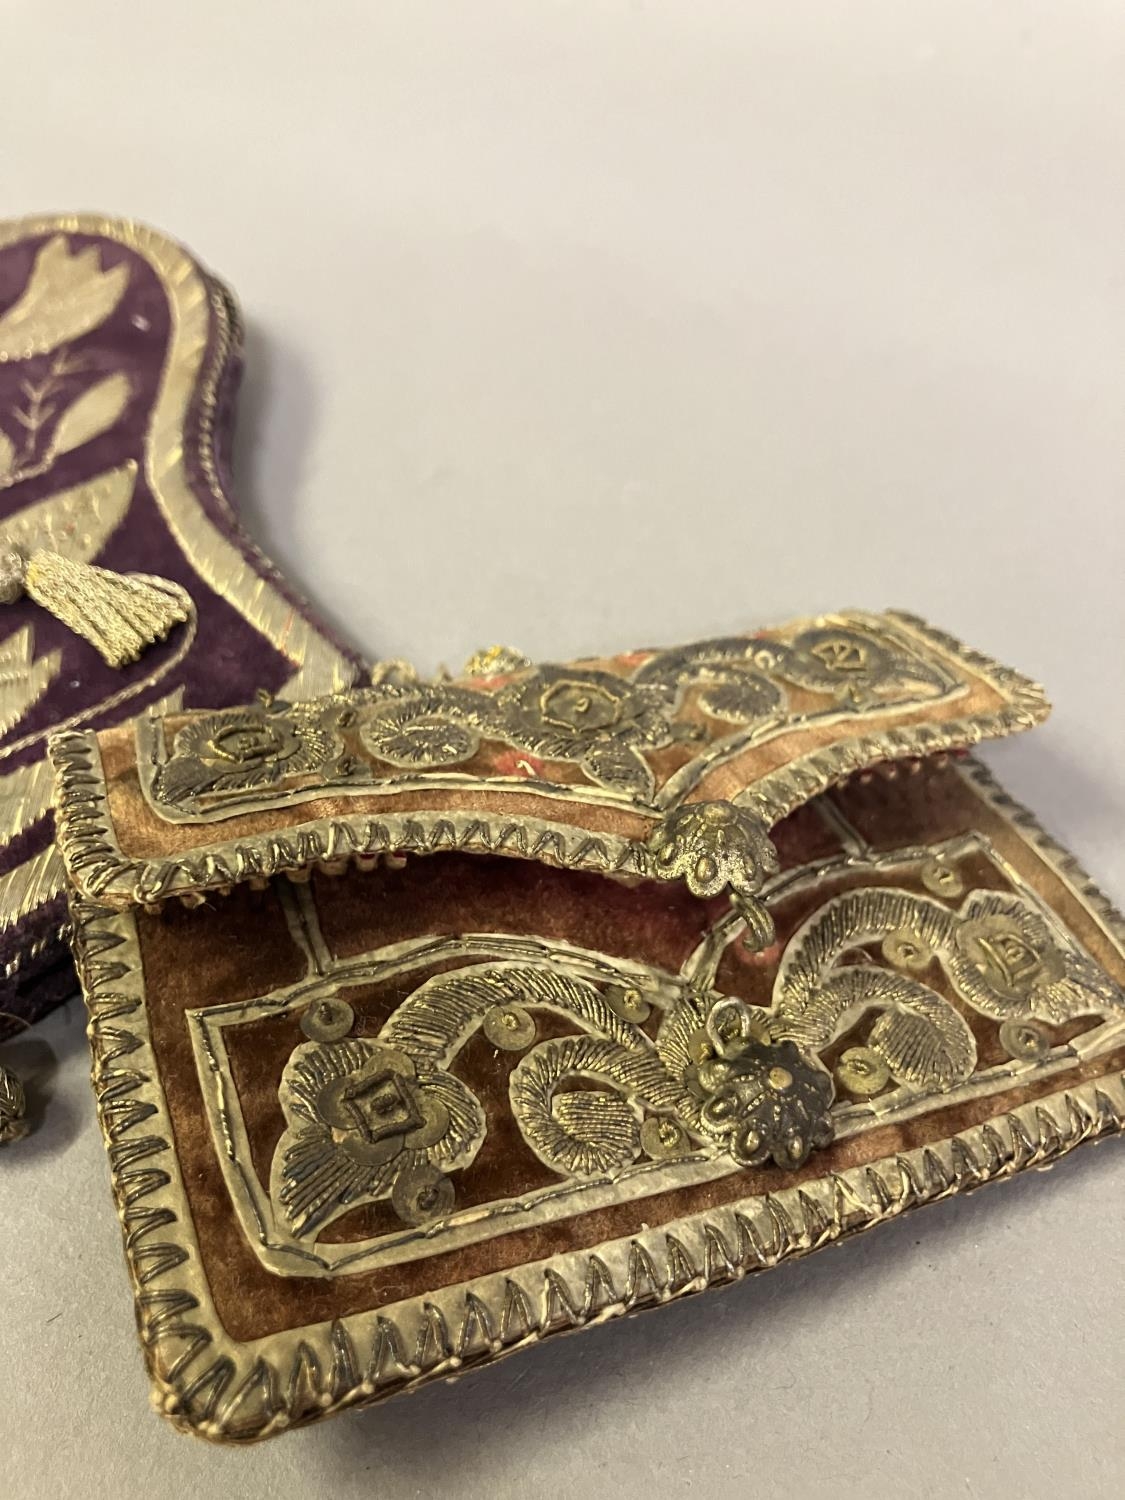 Antique Ottoman purses, two in plum velvet, one in ruby leather, all embroidered in gold: the - Image 2 of 5